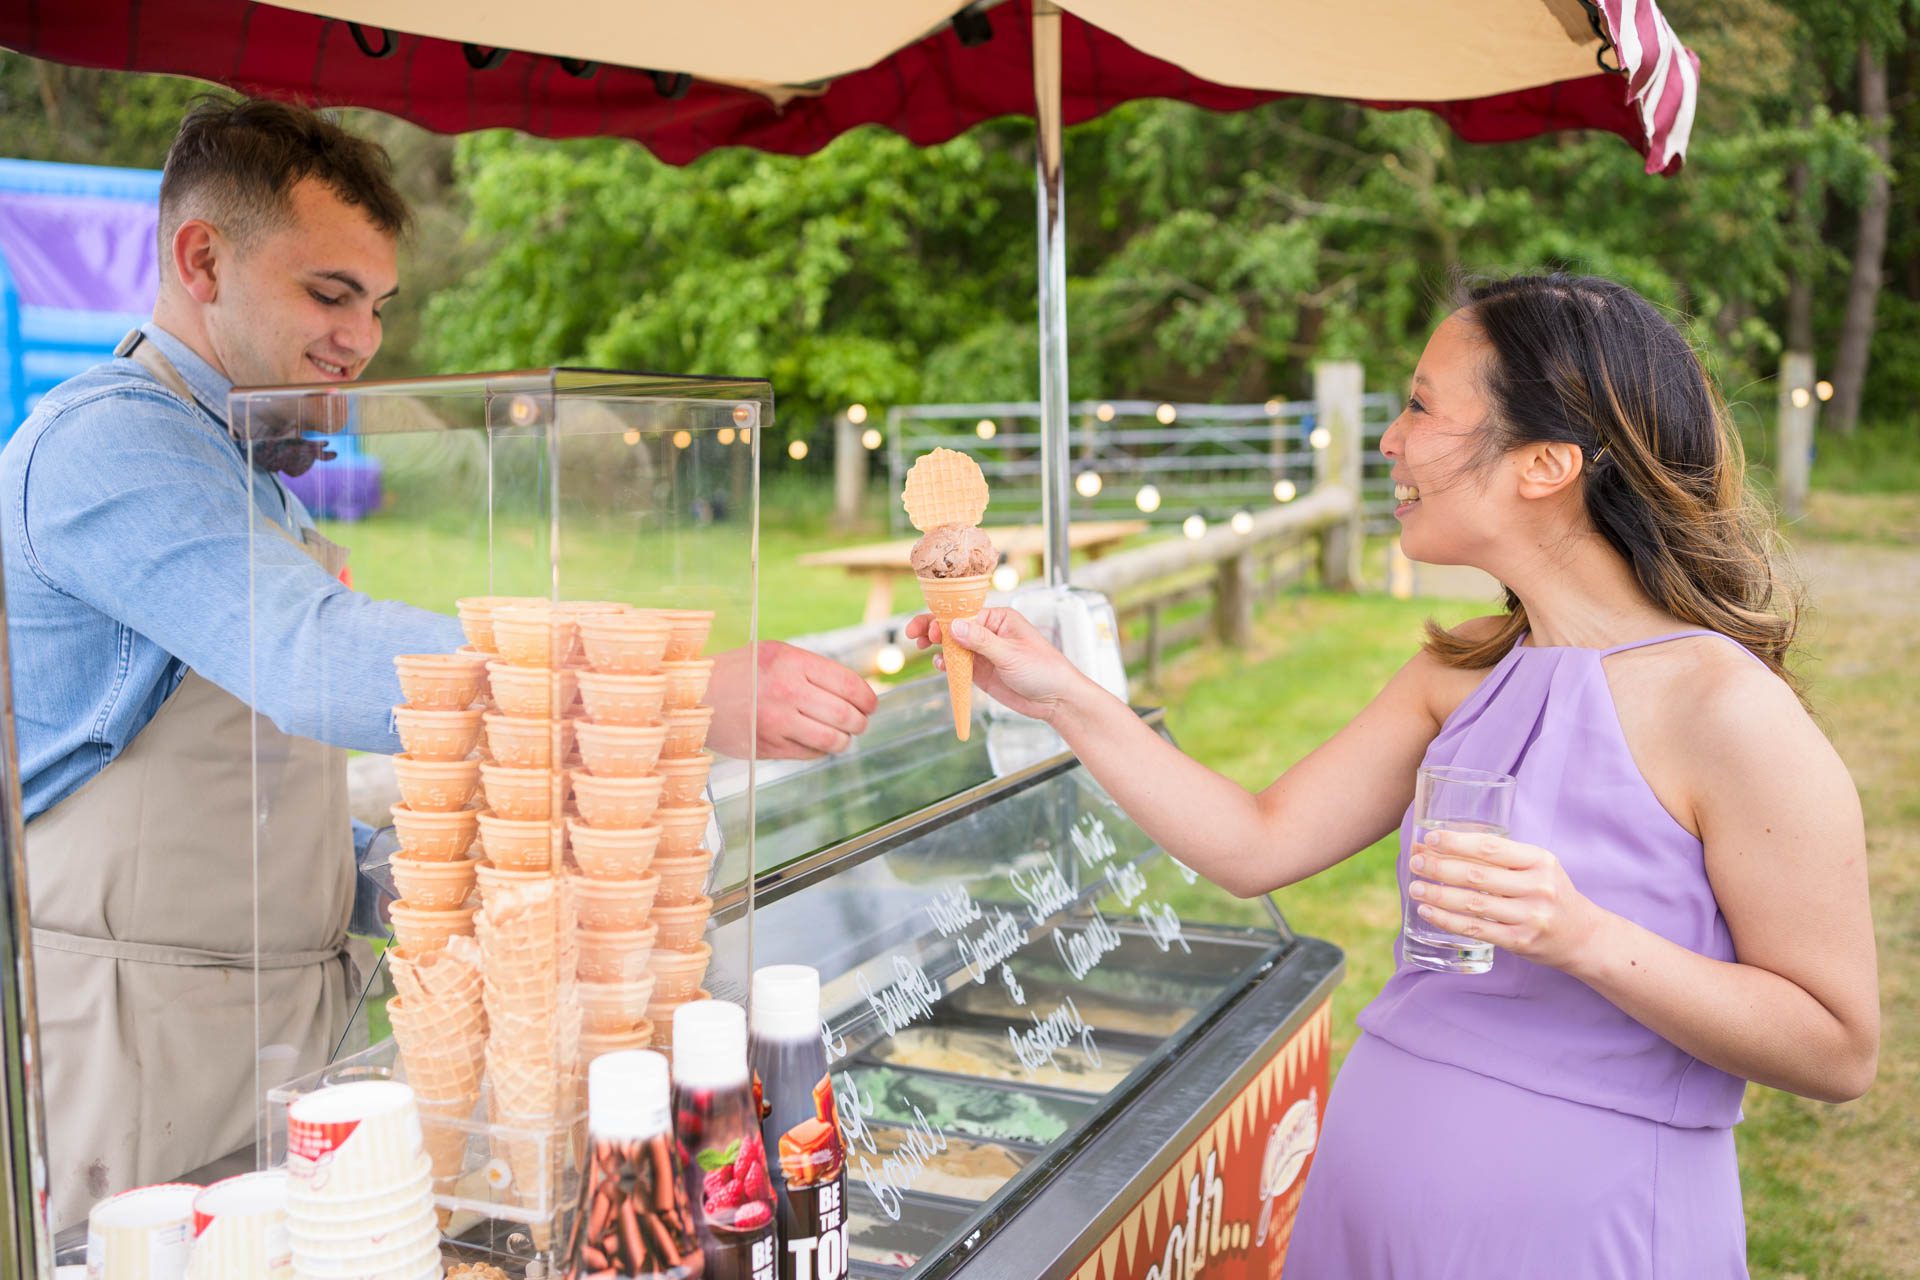 Ice cream stall for the wedding guests